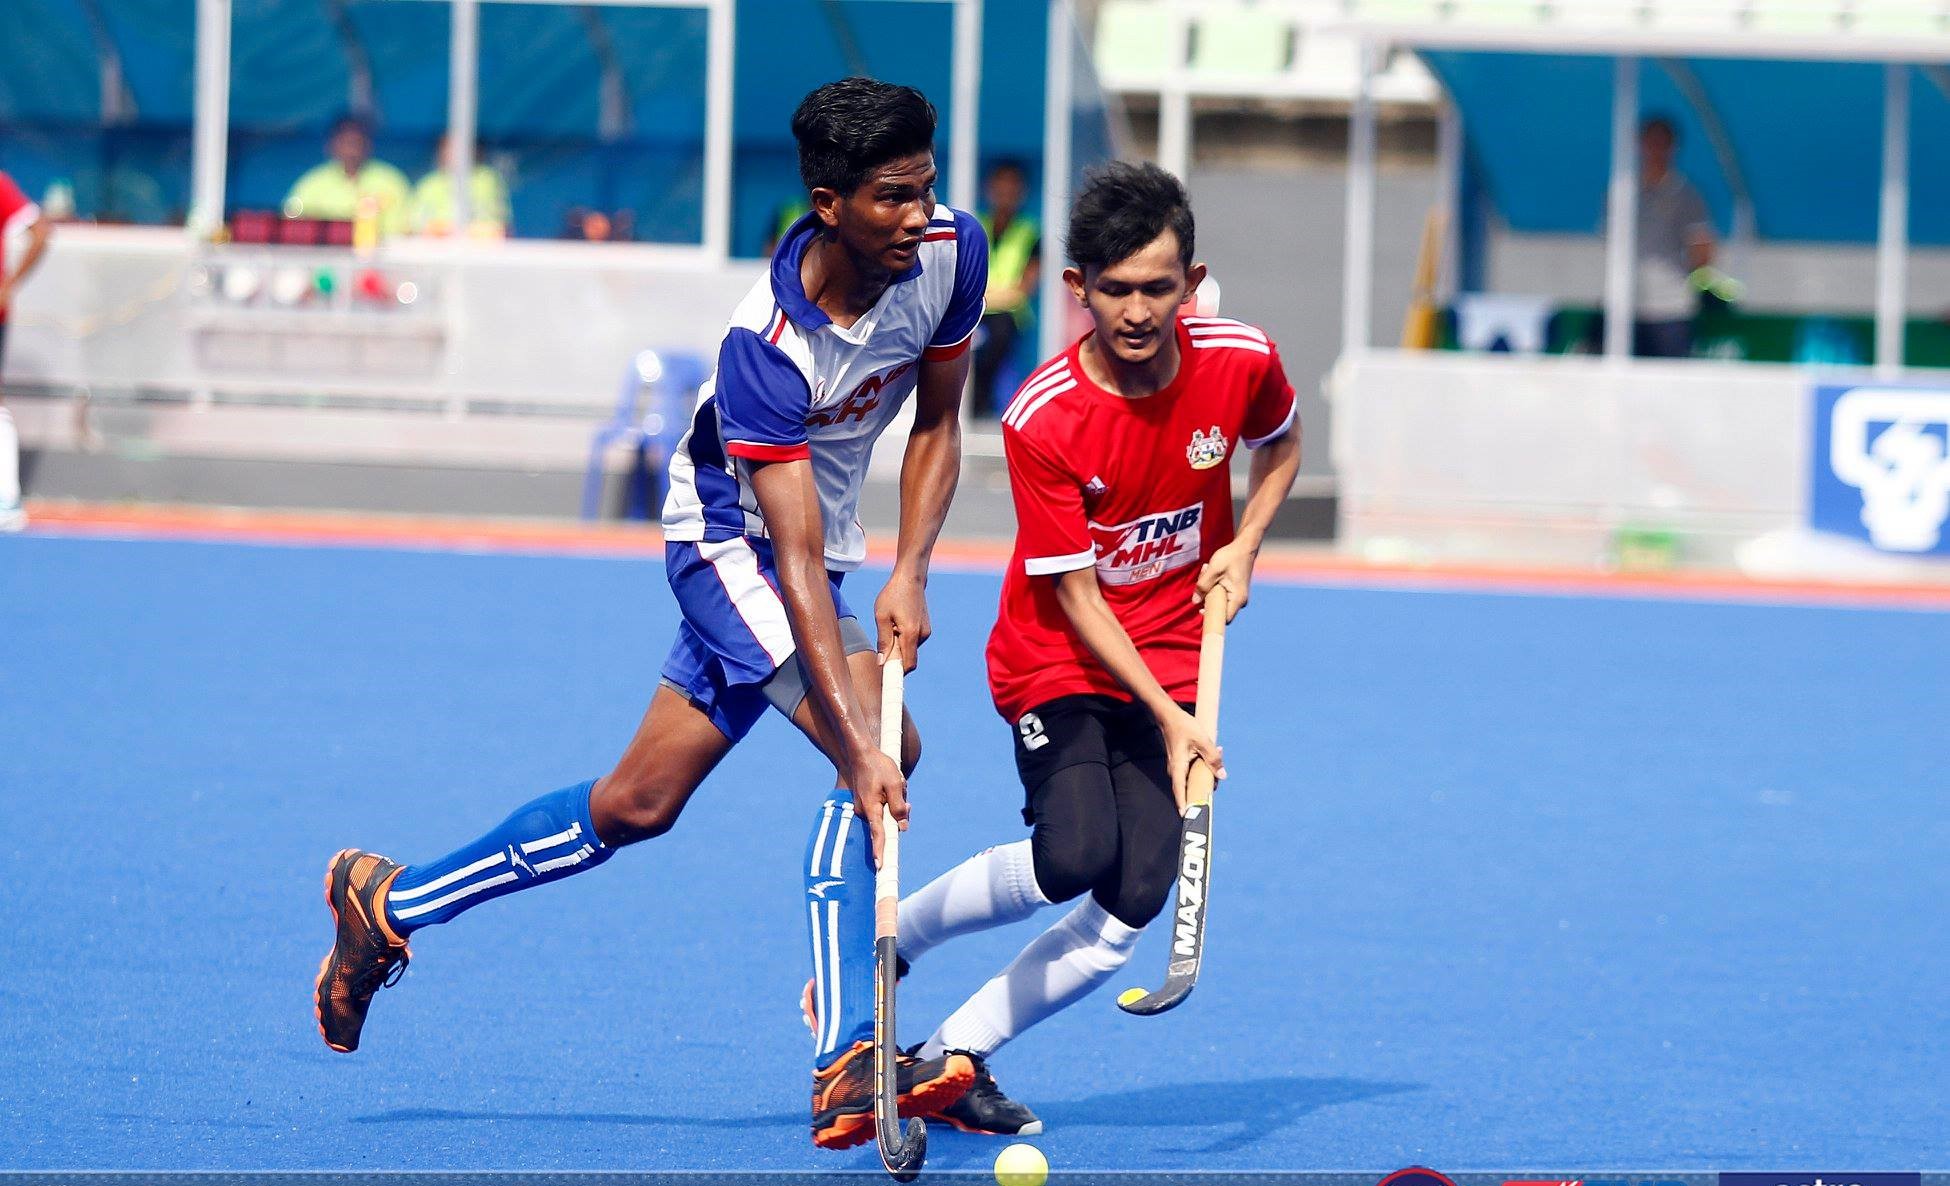 Rahul aims high, eyes Nations Cup glory despite inexperience